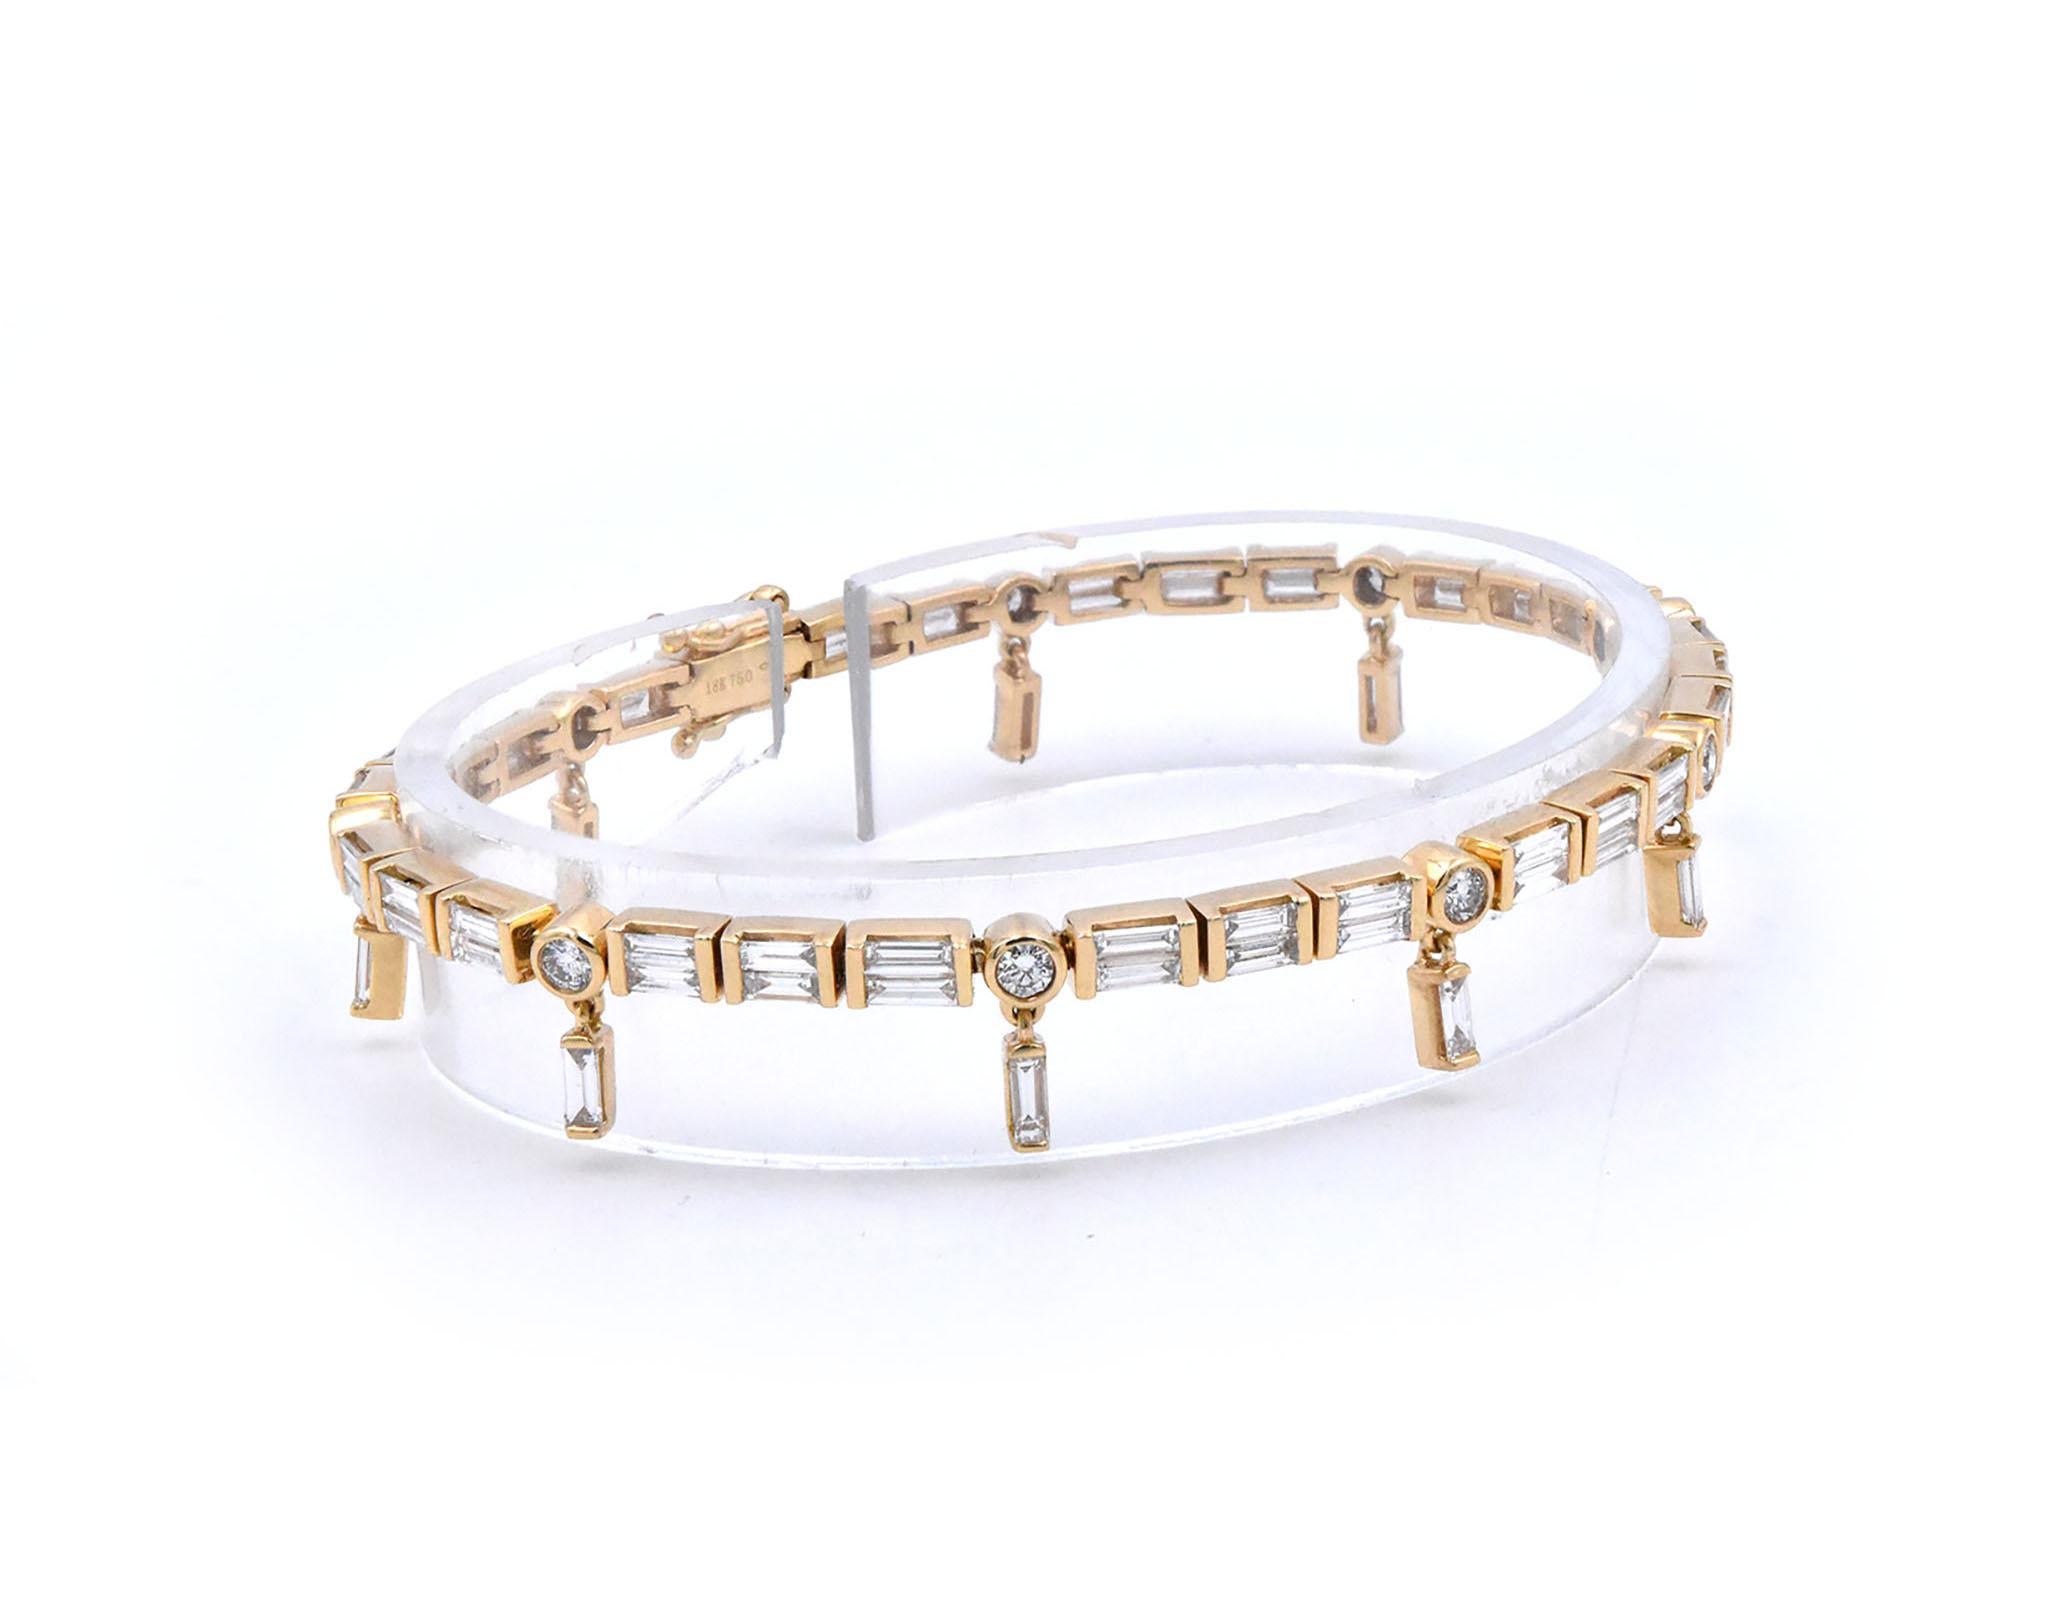 Material: 18K yellow gold
Diamonds: 74 baguette and round cut = 3.38cttw
Color: G
Clarity: VS1
Dimensions: bracelet will fit up to a 7-inch wrist
Weight: 15.37 grams
